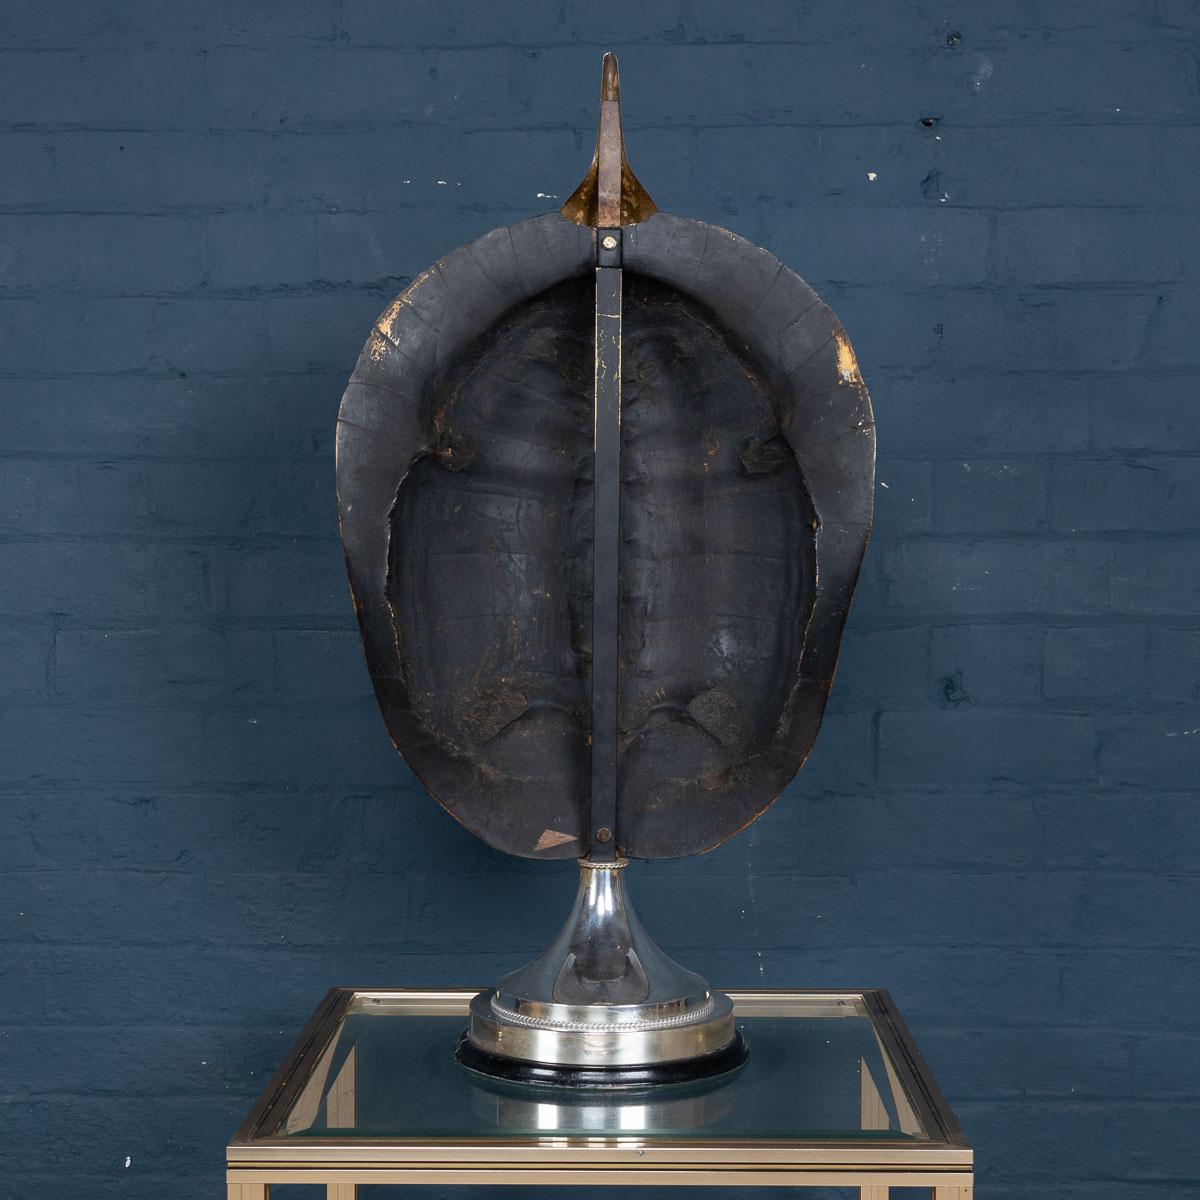 A stunning late 19th century “blond” turtle shell later mounted on a silver plated stand by the renowned designer Anthony Redmile. Anthony Redmile burst into the London interior design scene in the 1960s, producing some of the most eclectic items